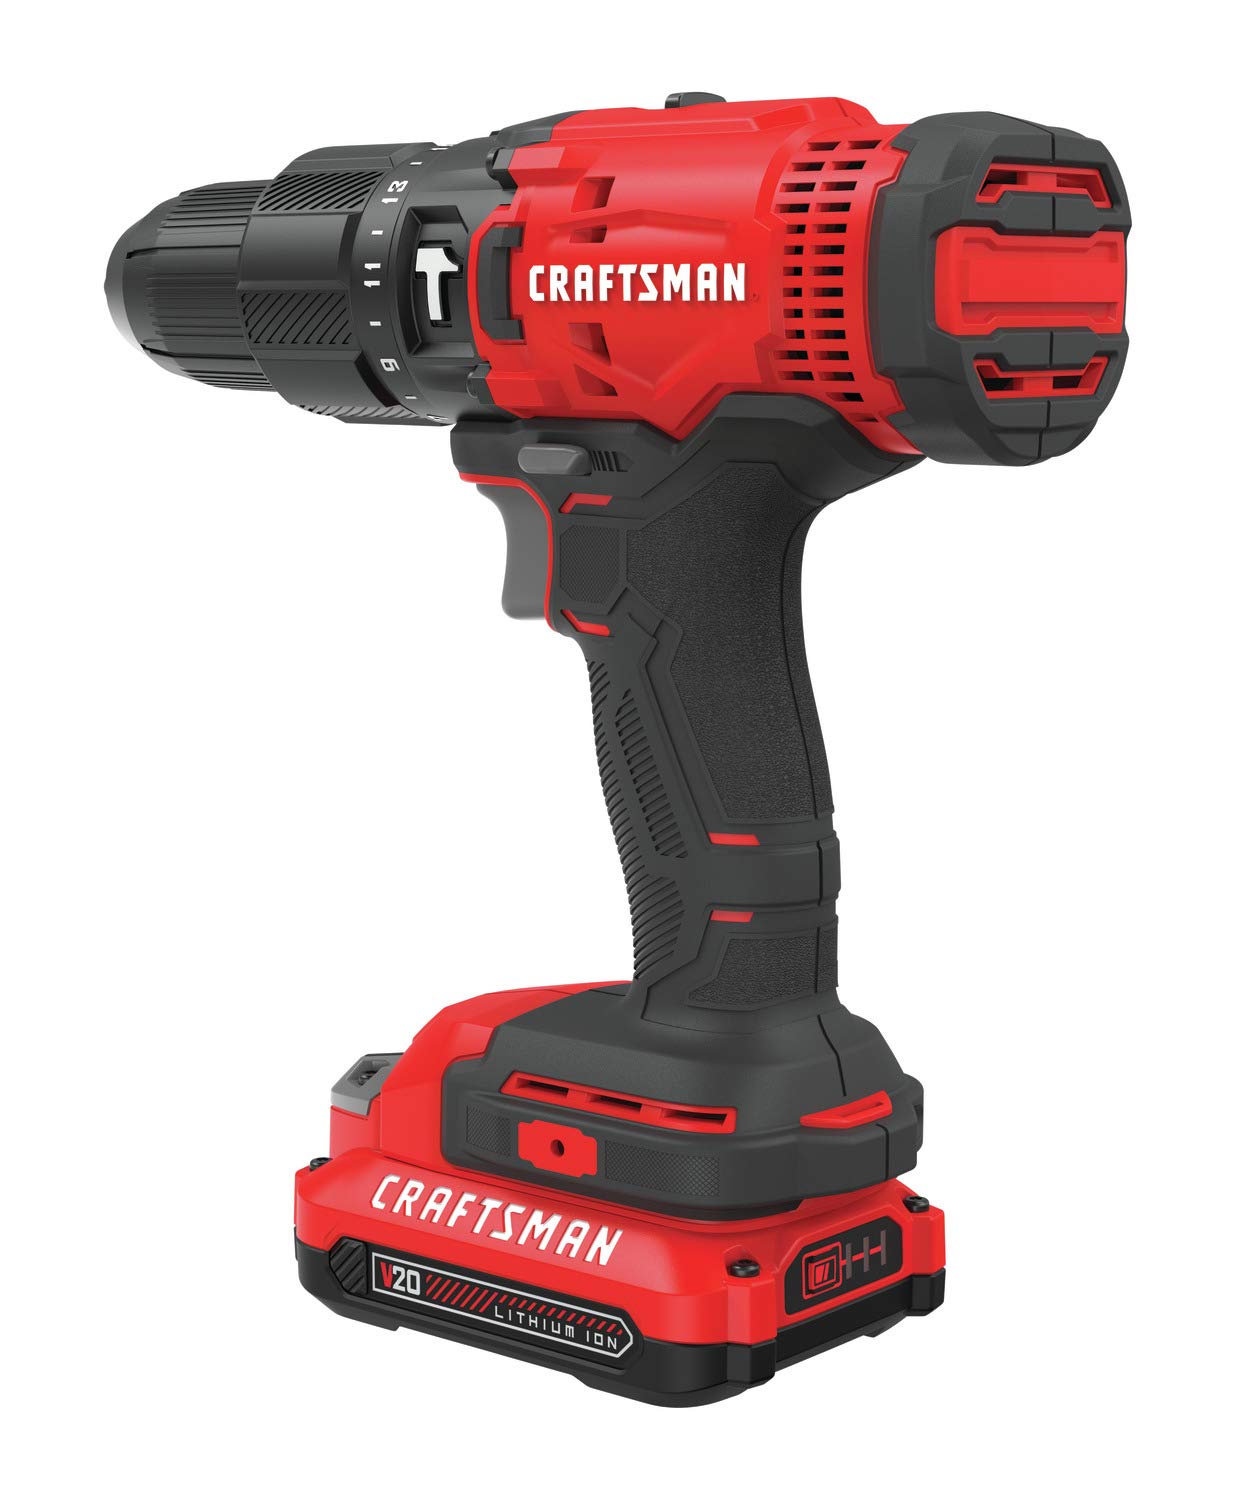 CRAFTSMAN V20 Cordless Hammer Drill Kit, 1/2 inch, 2 Batteries and Charger Included (CMCD711C2)